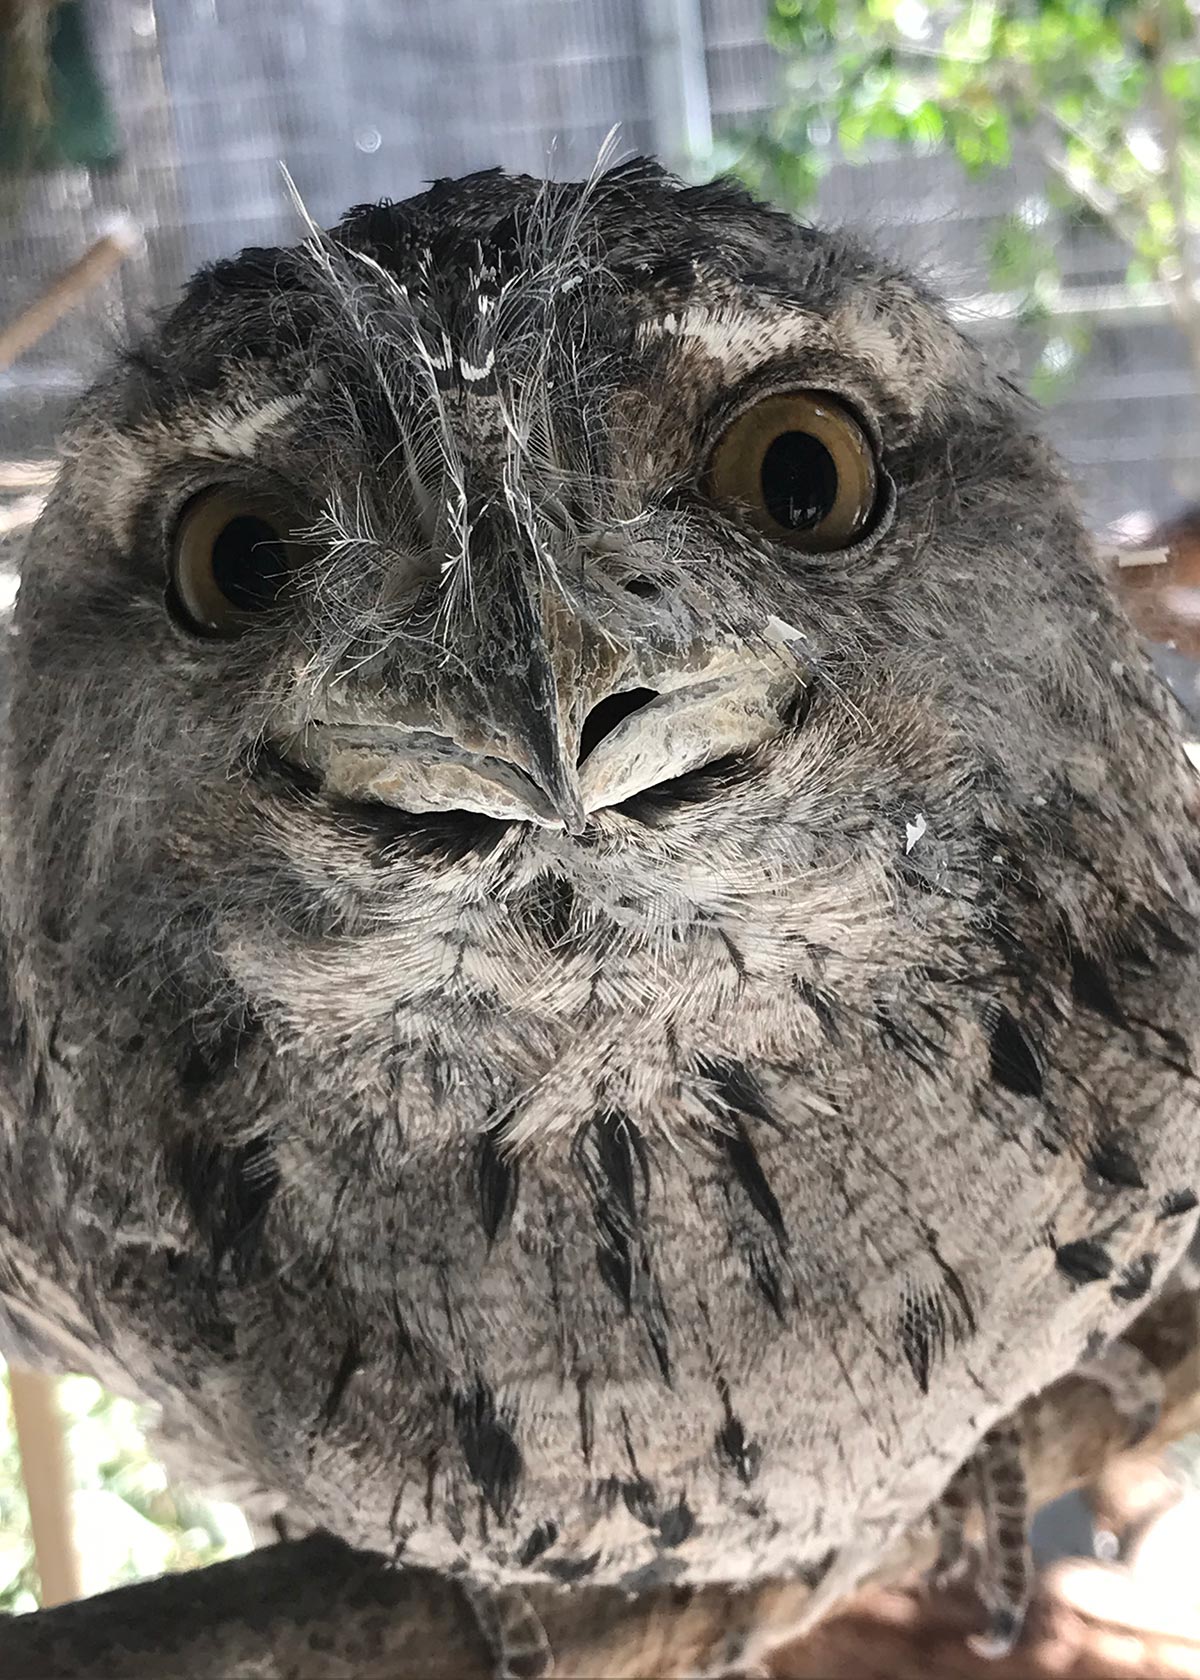 Tawny frogmouth Maynard with big eyes and gray feathers